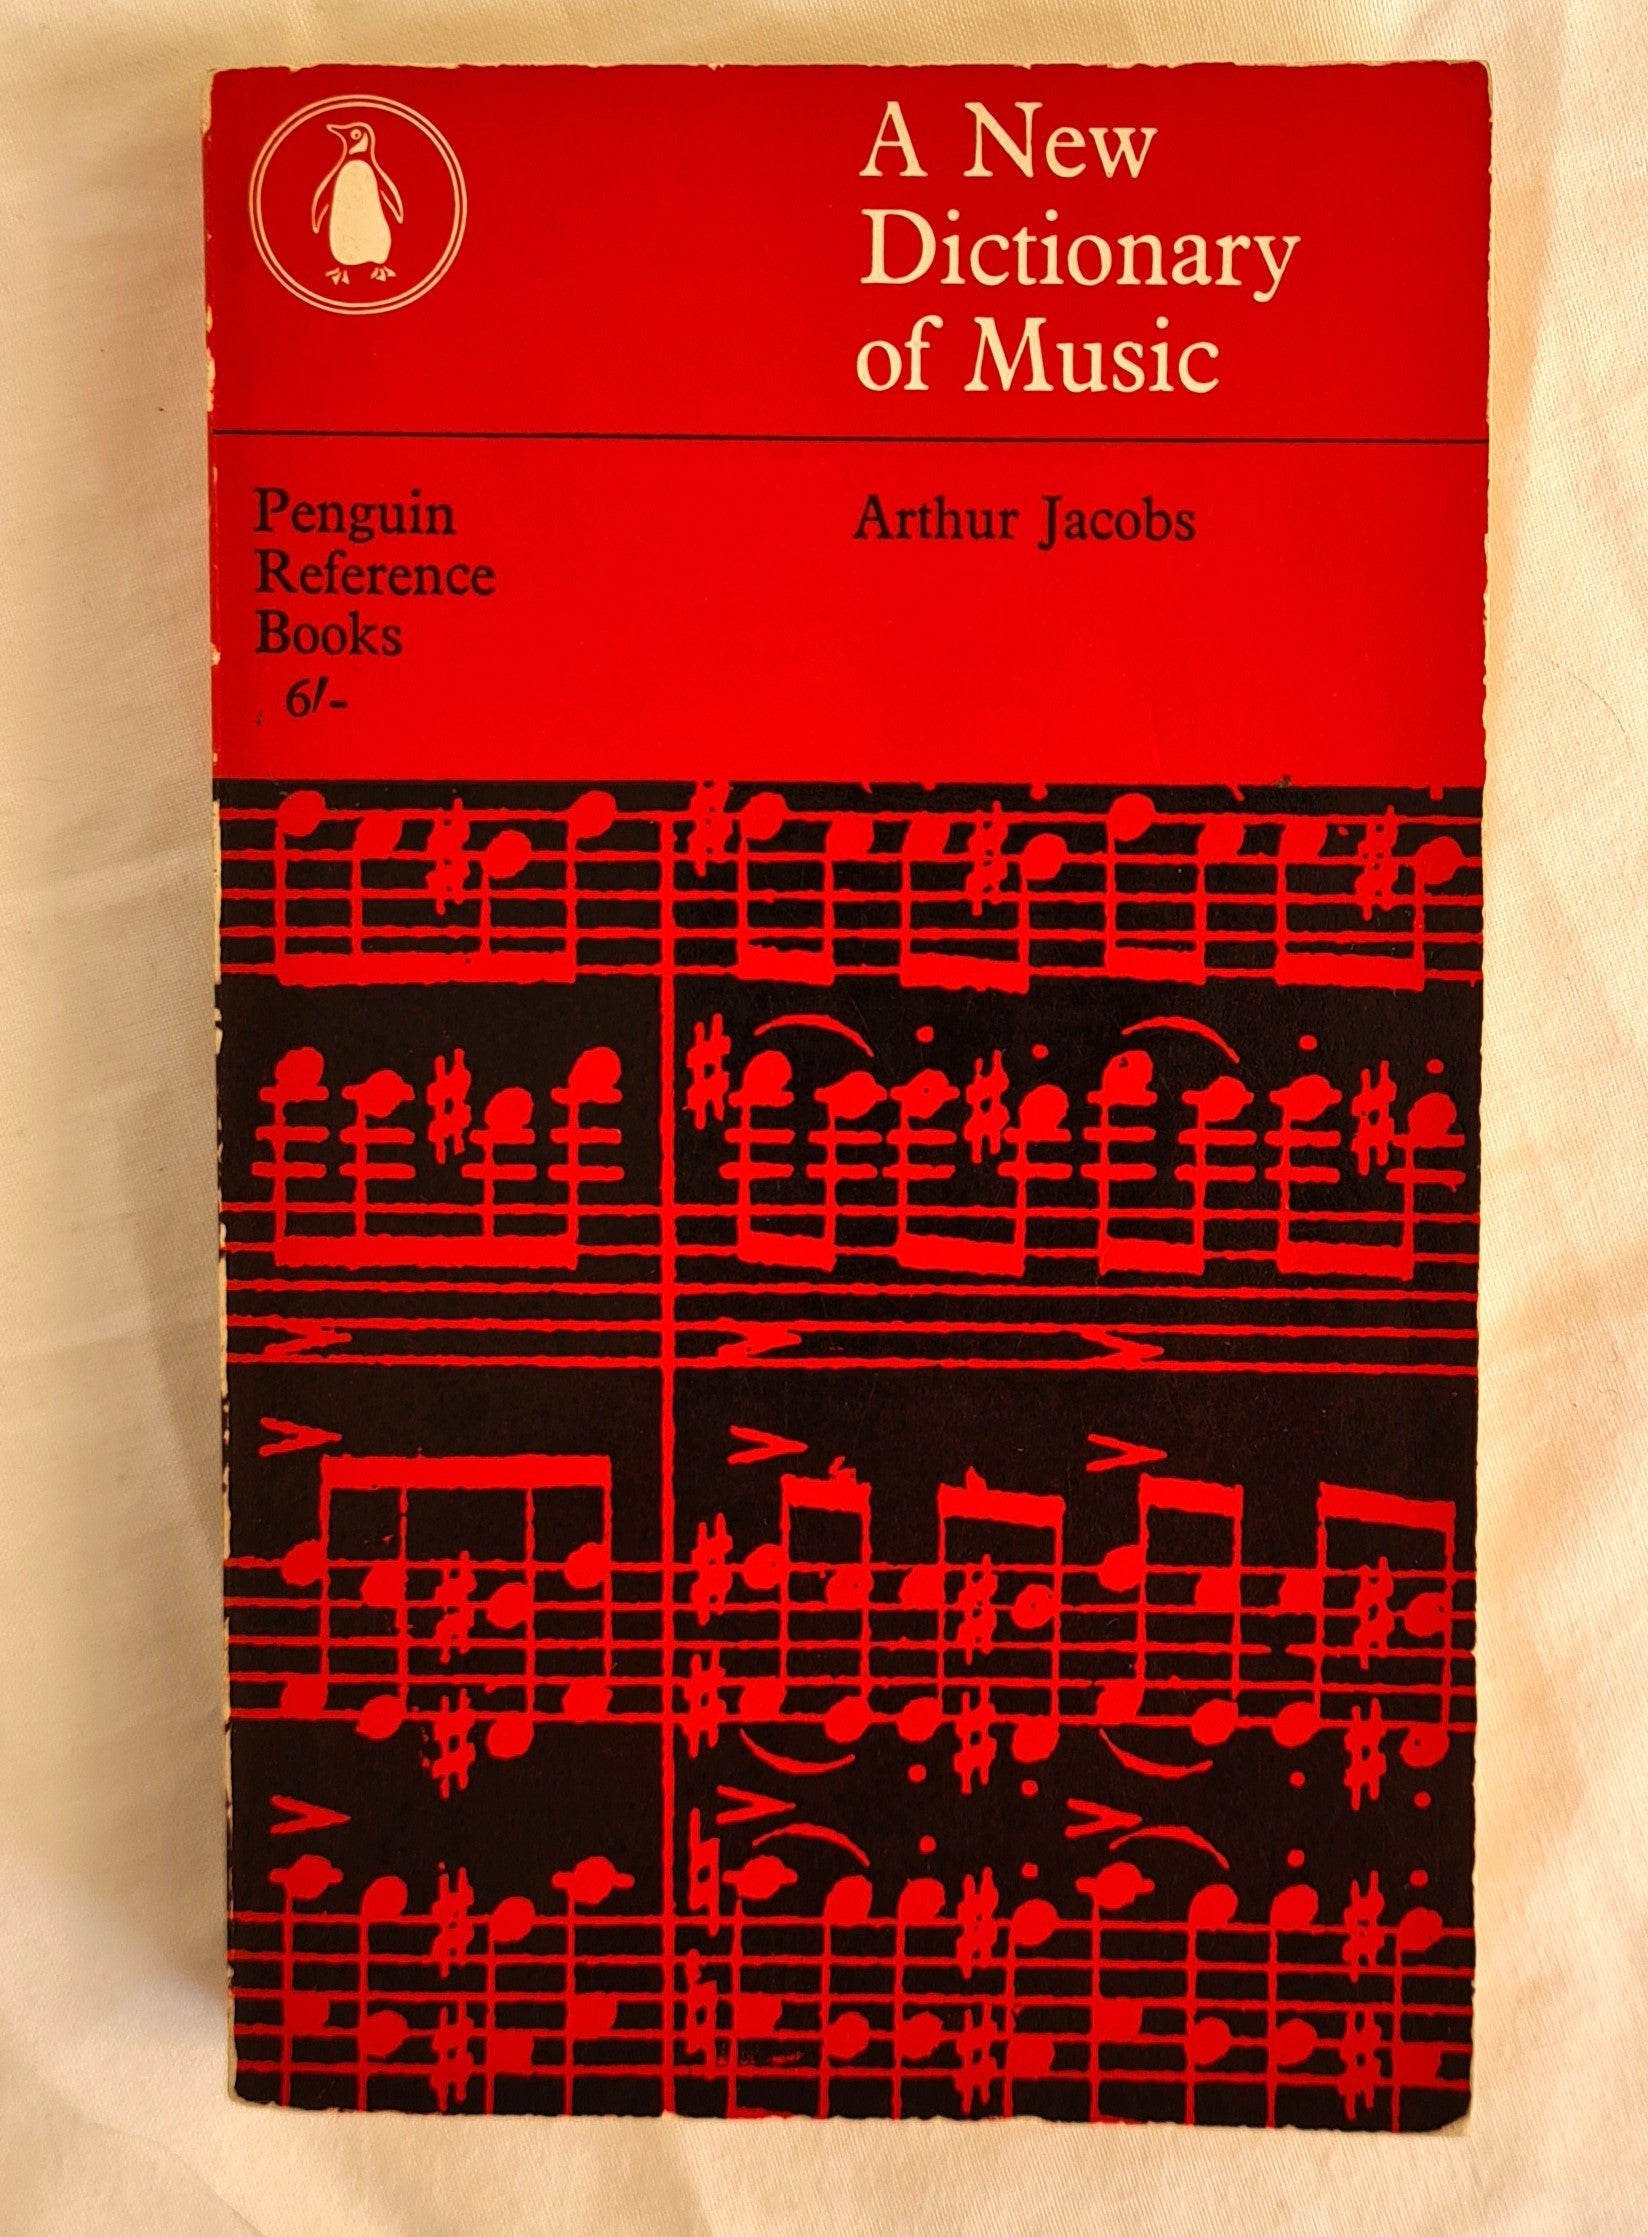 A New Dictionary of Music  by Arthur Jacobs  Penguin Reference Books